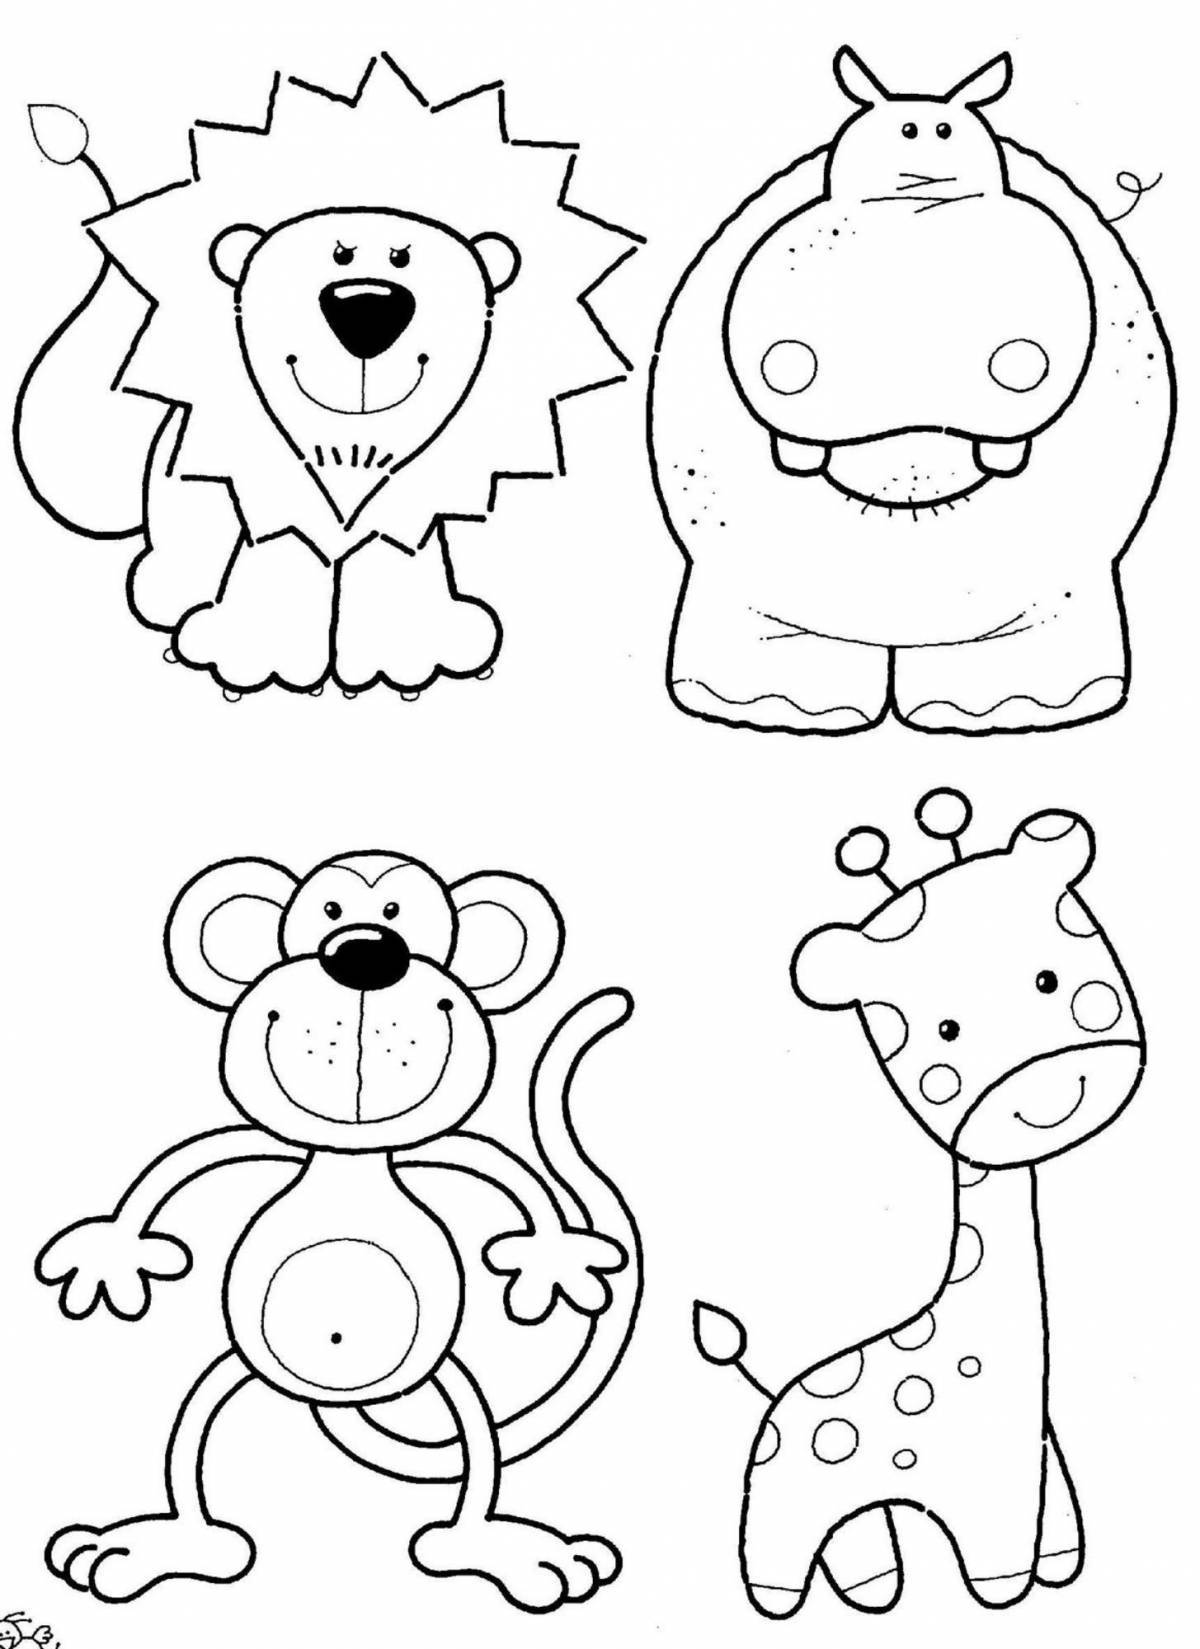 Coloring pages animals for children 6-7 years old